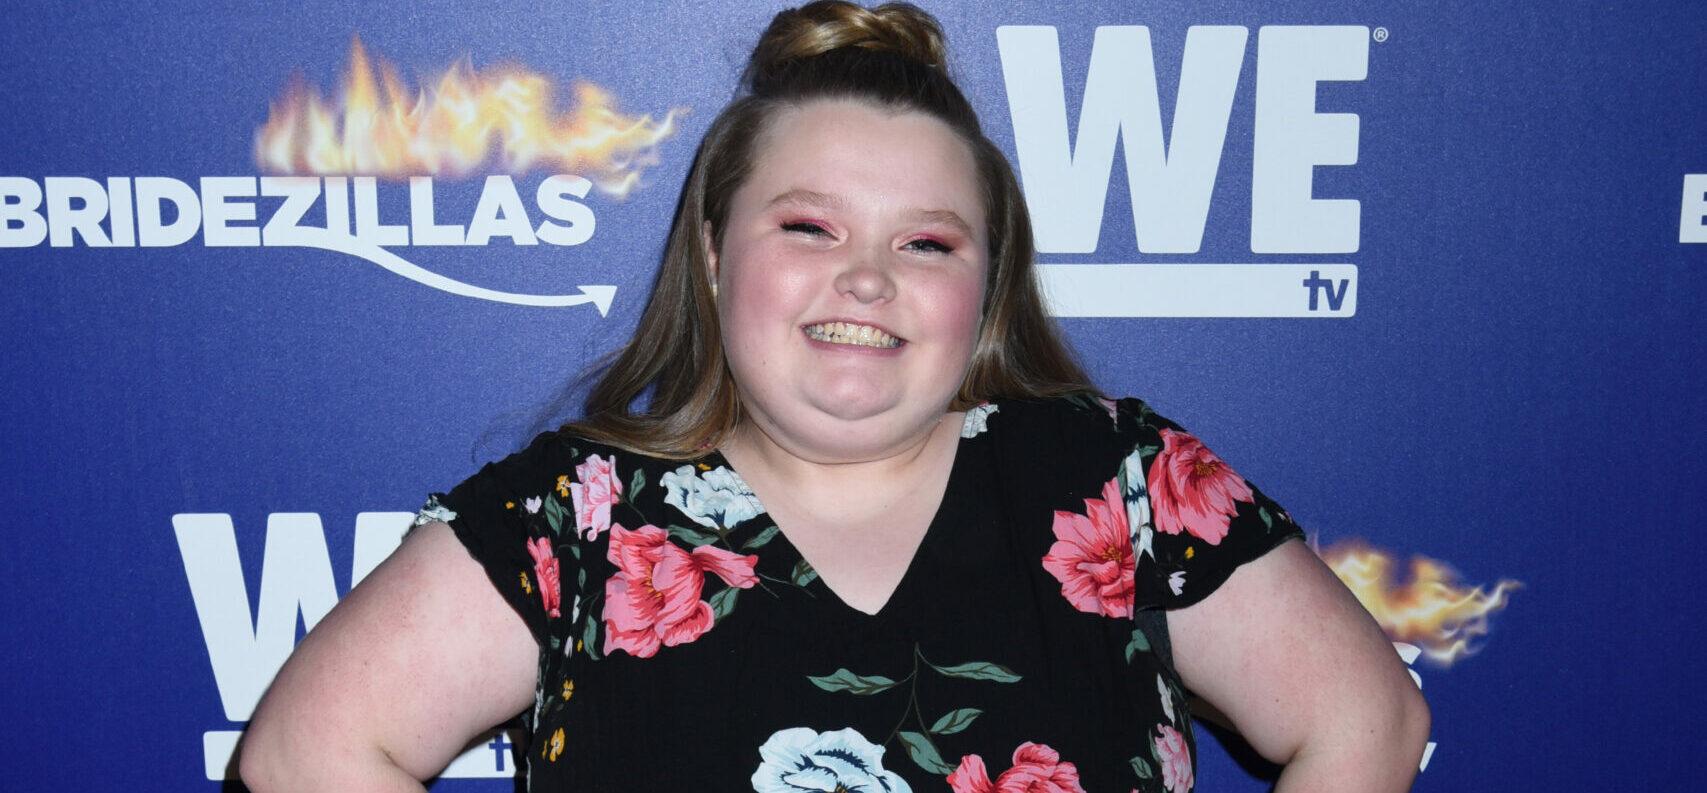 Honey Boo Boo Has A 20-Year-Old Boyfriend?! She's Only 16!